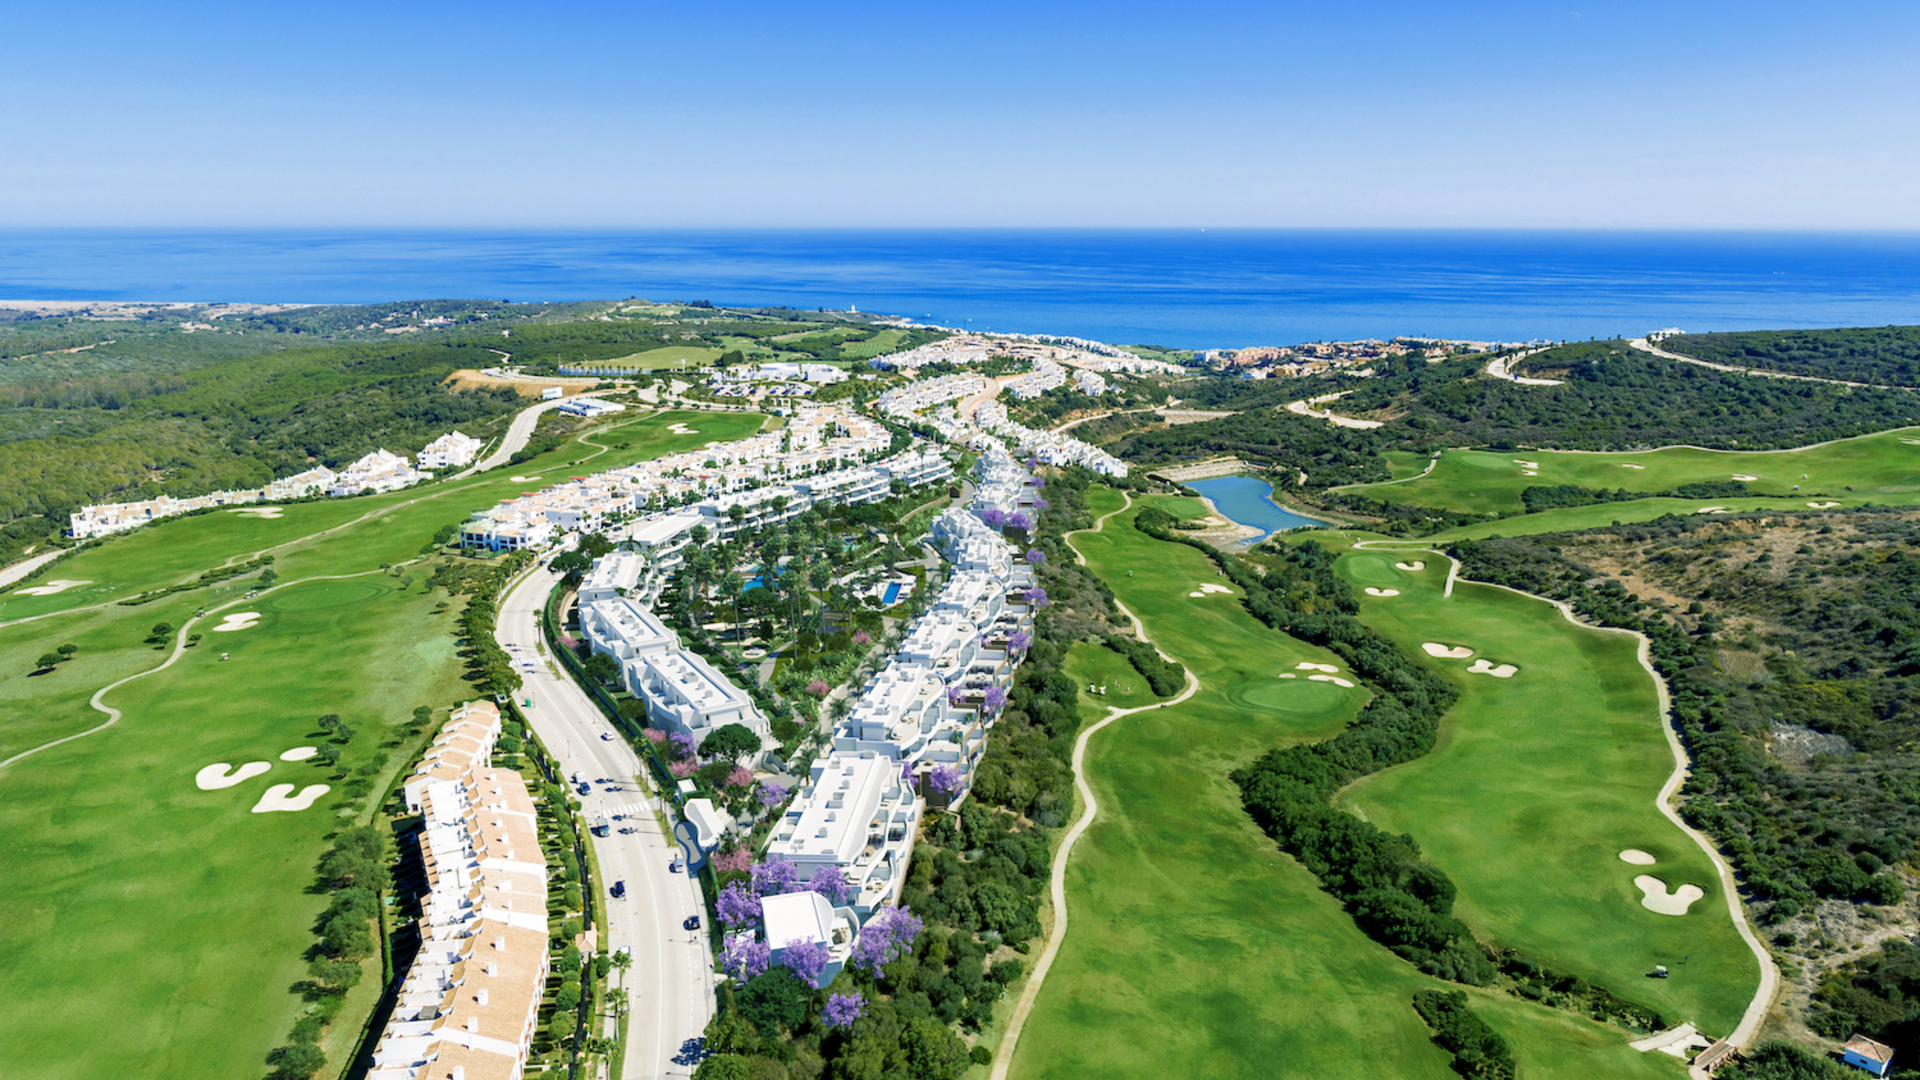 Apartments in a quiet location by the golf course with a view of Gibraltar